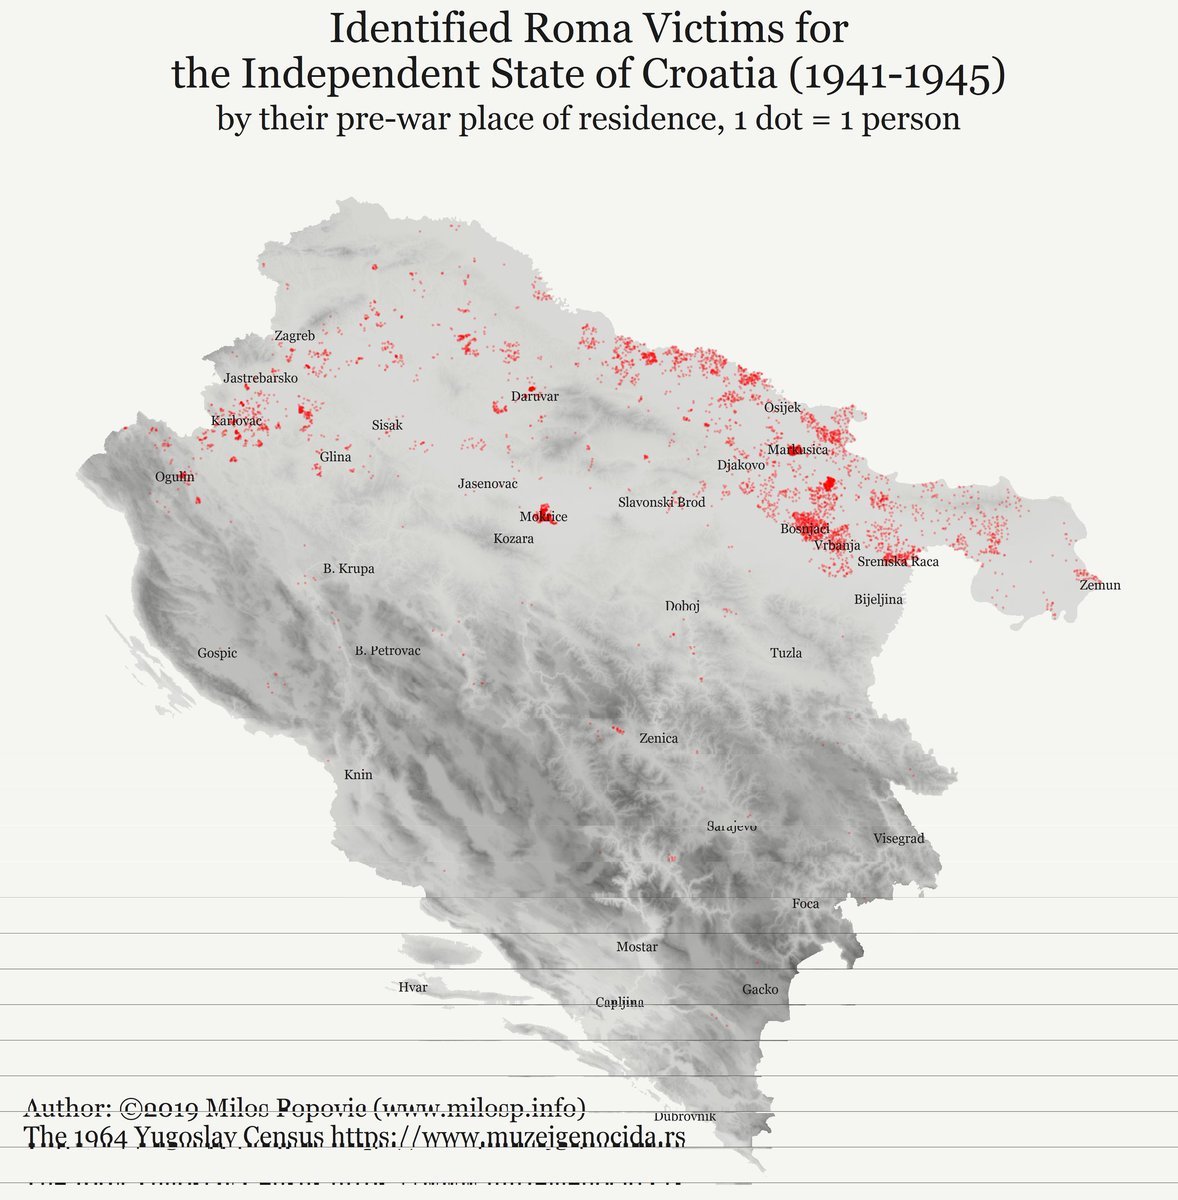 On The Roma Holocaust Memorial Day, we remember the victims of the Romani genocide in World War II. My map shows the Romani victims of the Ustasha regime in the Independent State of Croatia

#RomaGenocideRemembranceDay #Porajmos #dataviz #datascience #maps #rstats #gis